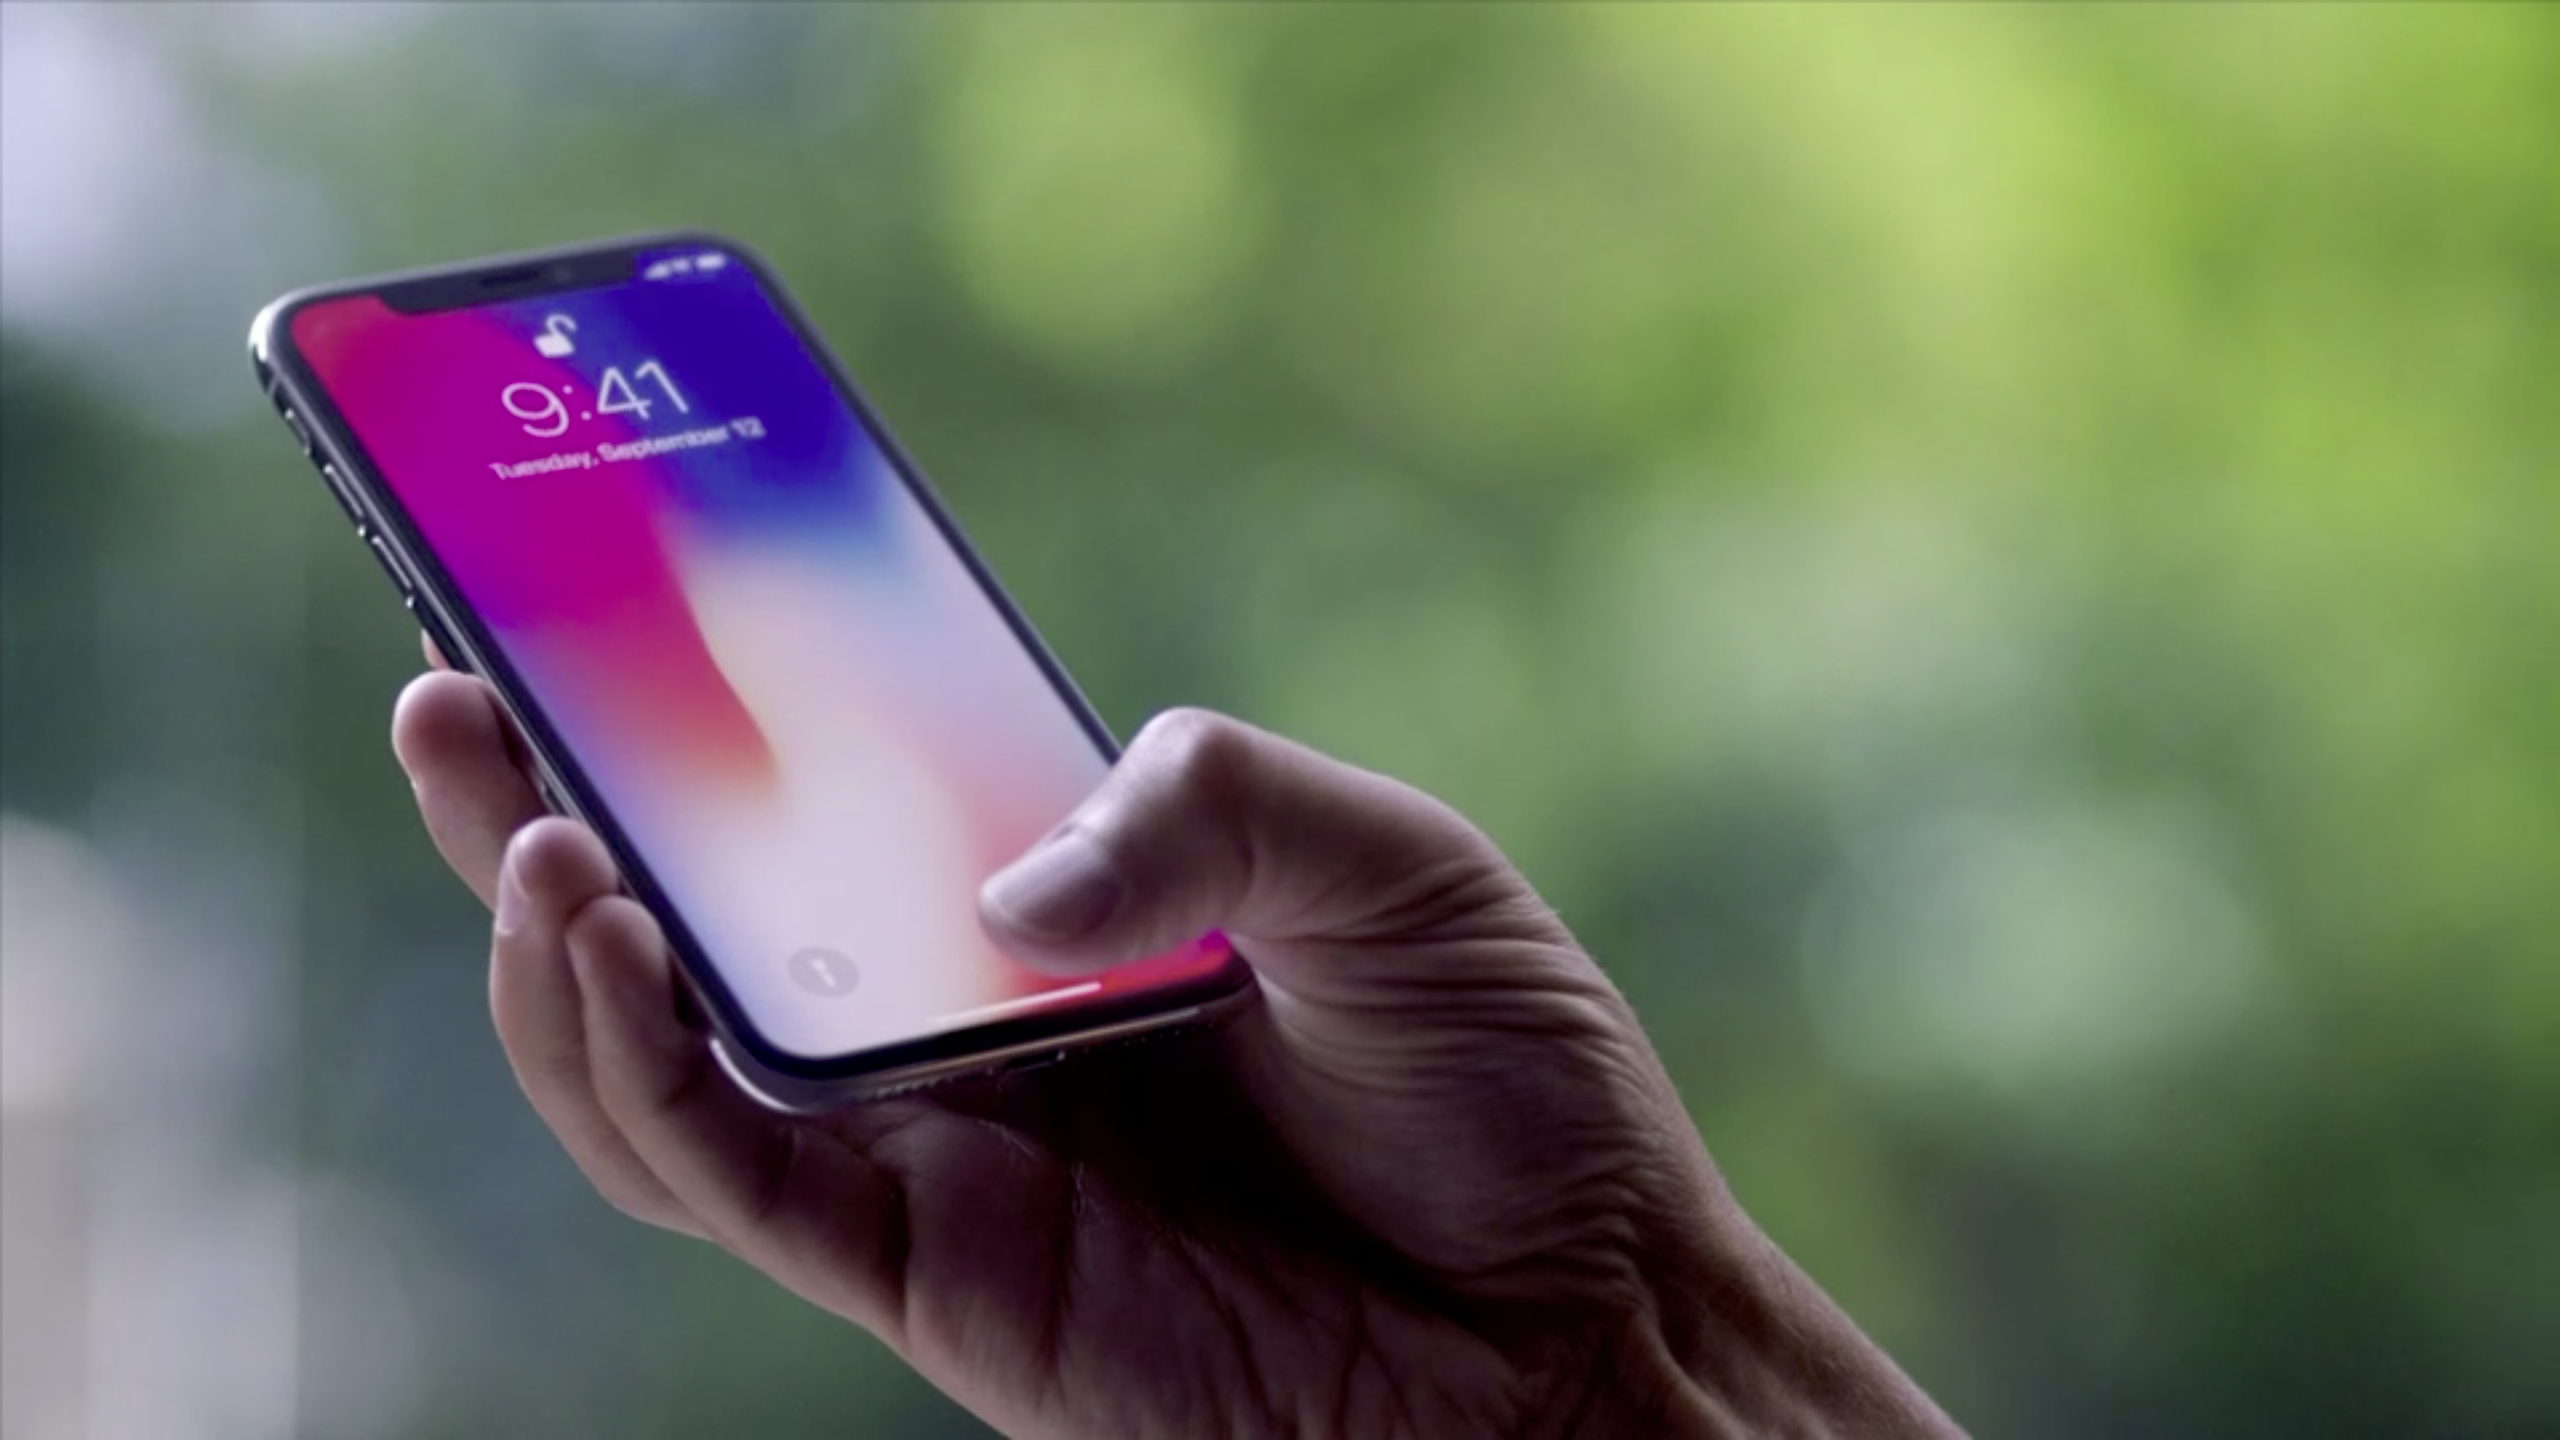 iPhone X considered to be the most fragile (popular) smartphone ever made